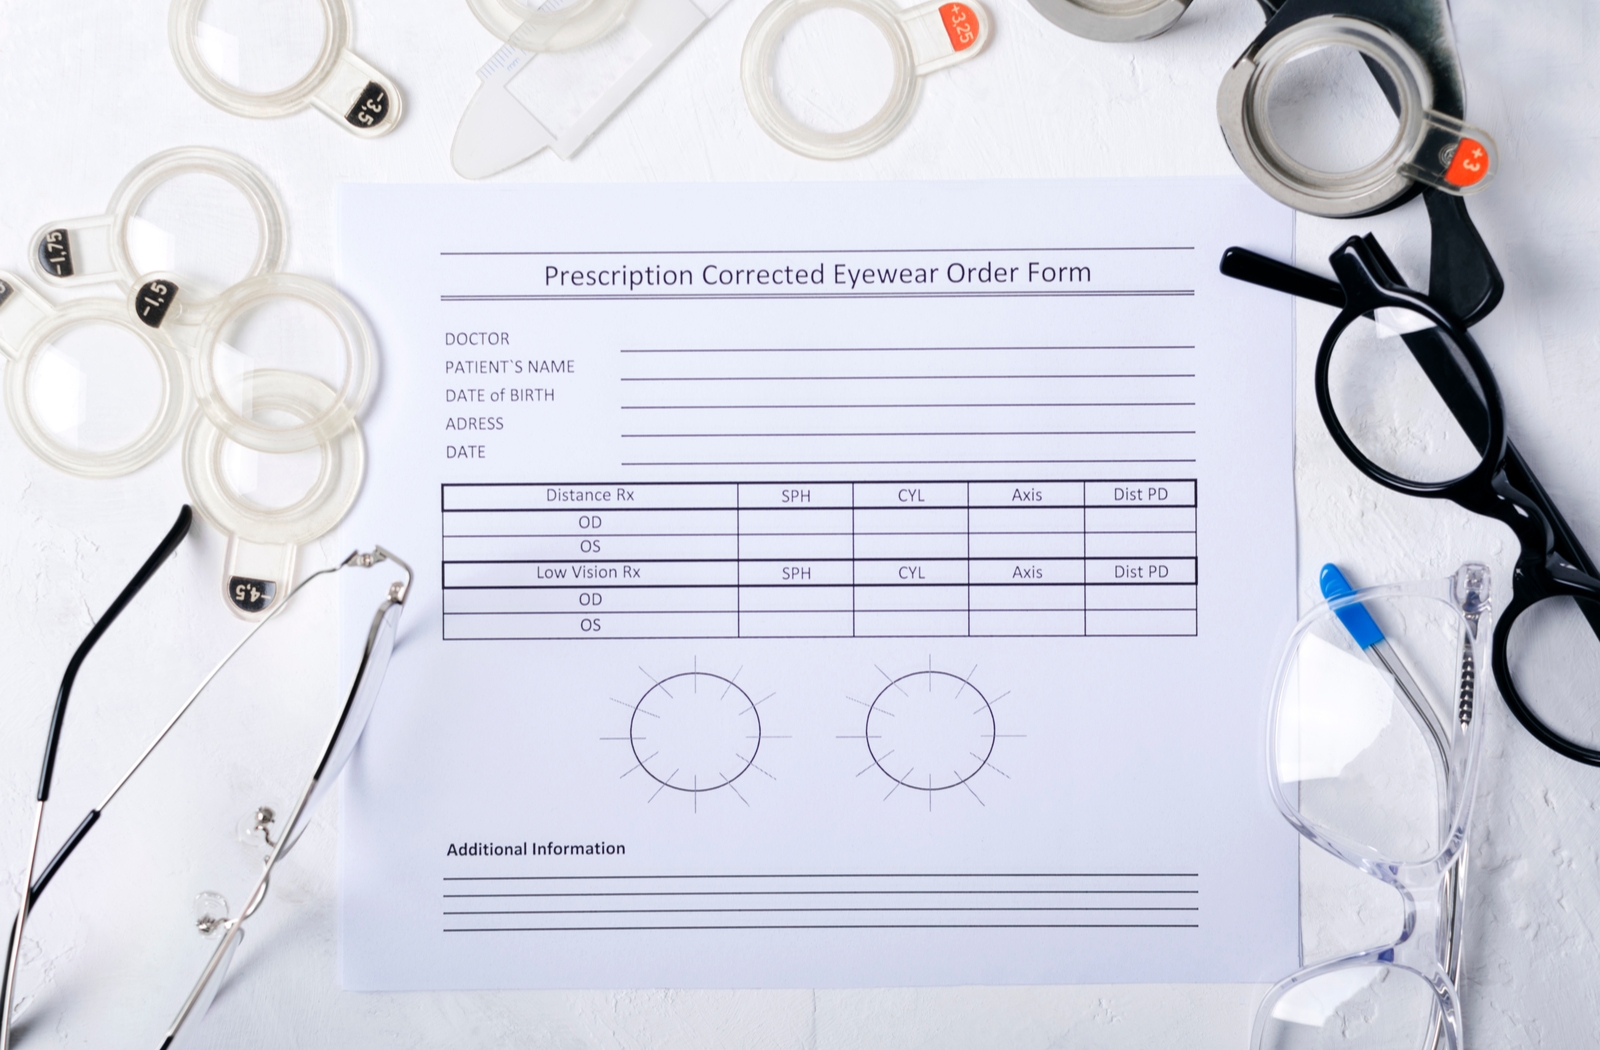 Topdown view of a prescription corrected eyewear order form surrounded by glasses and various optical tools.